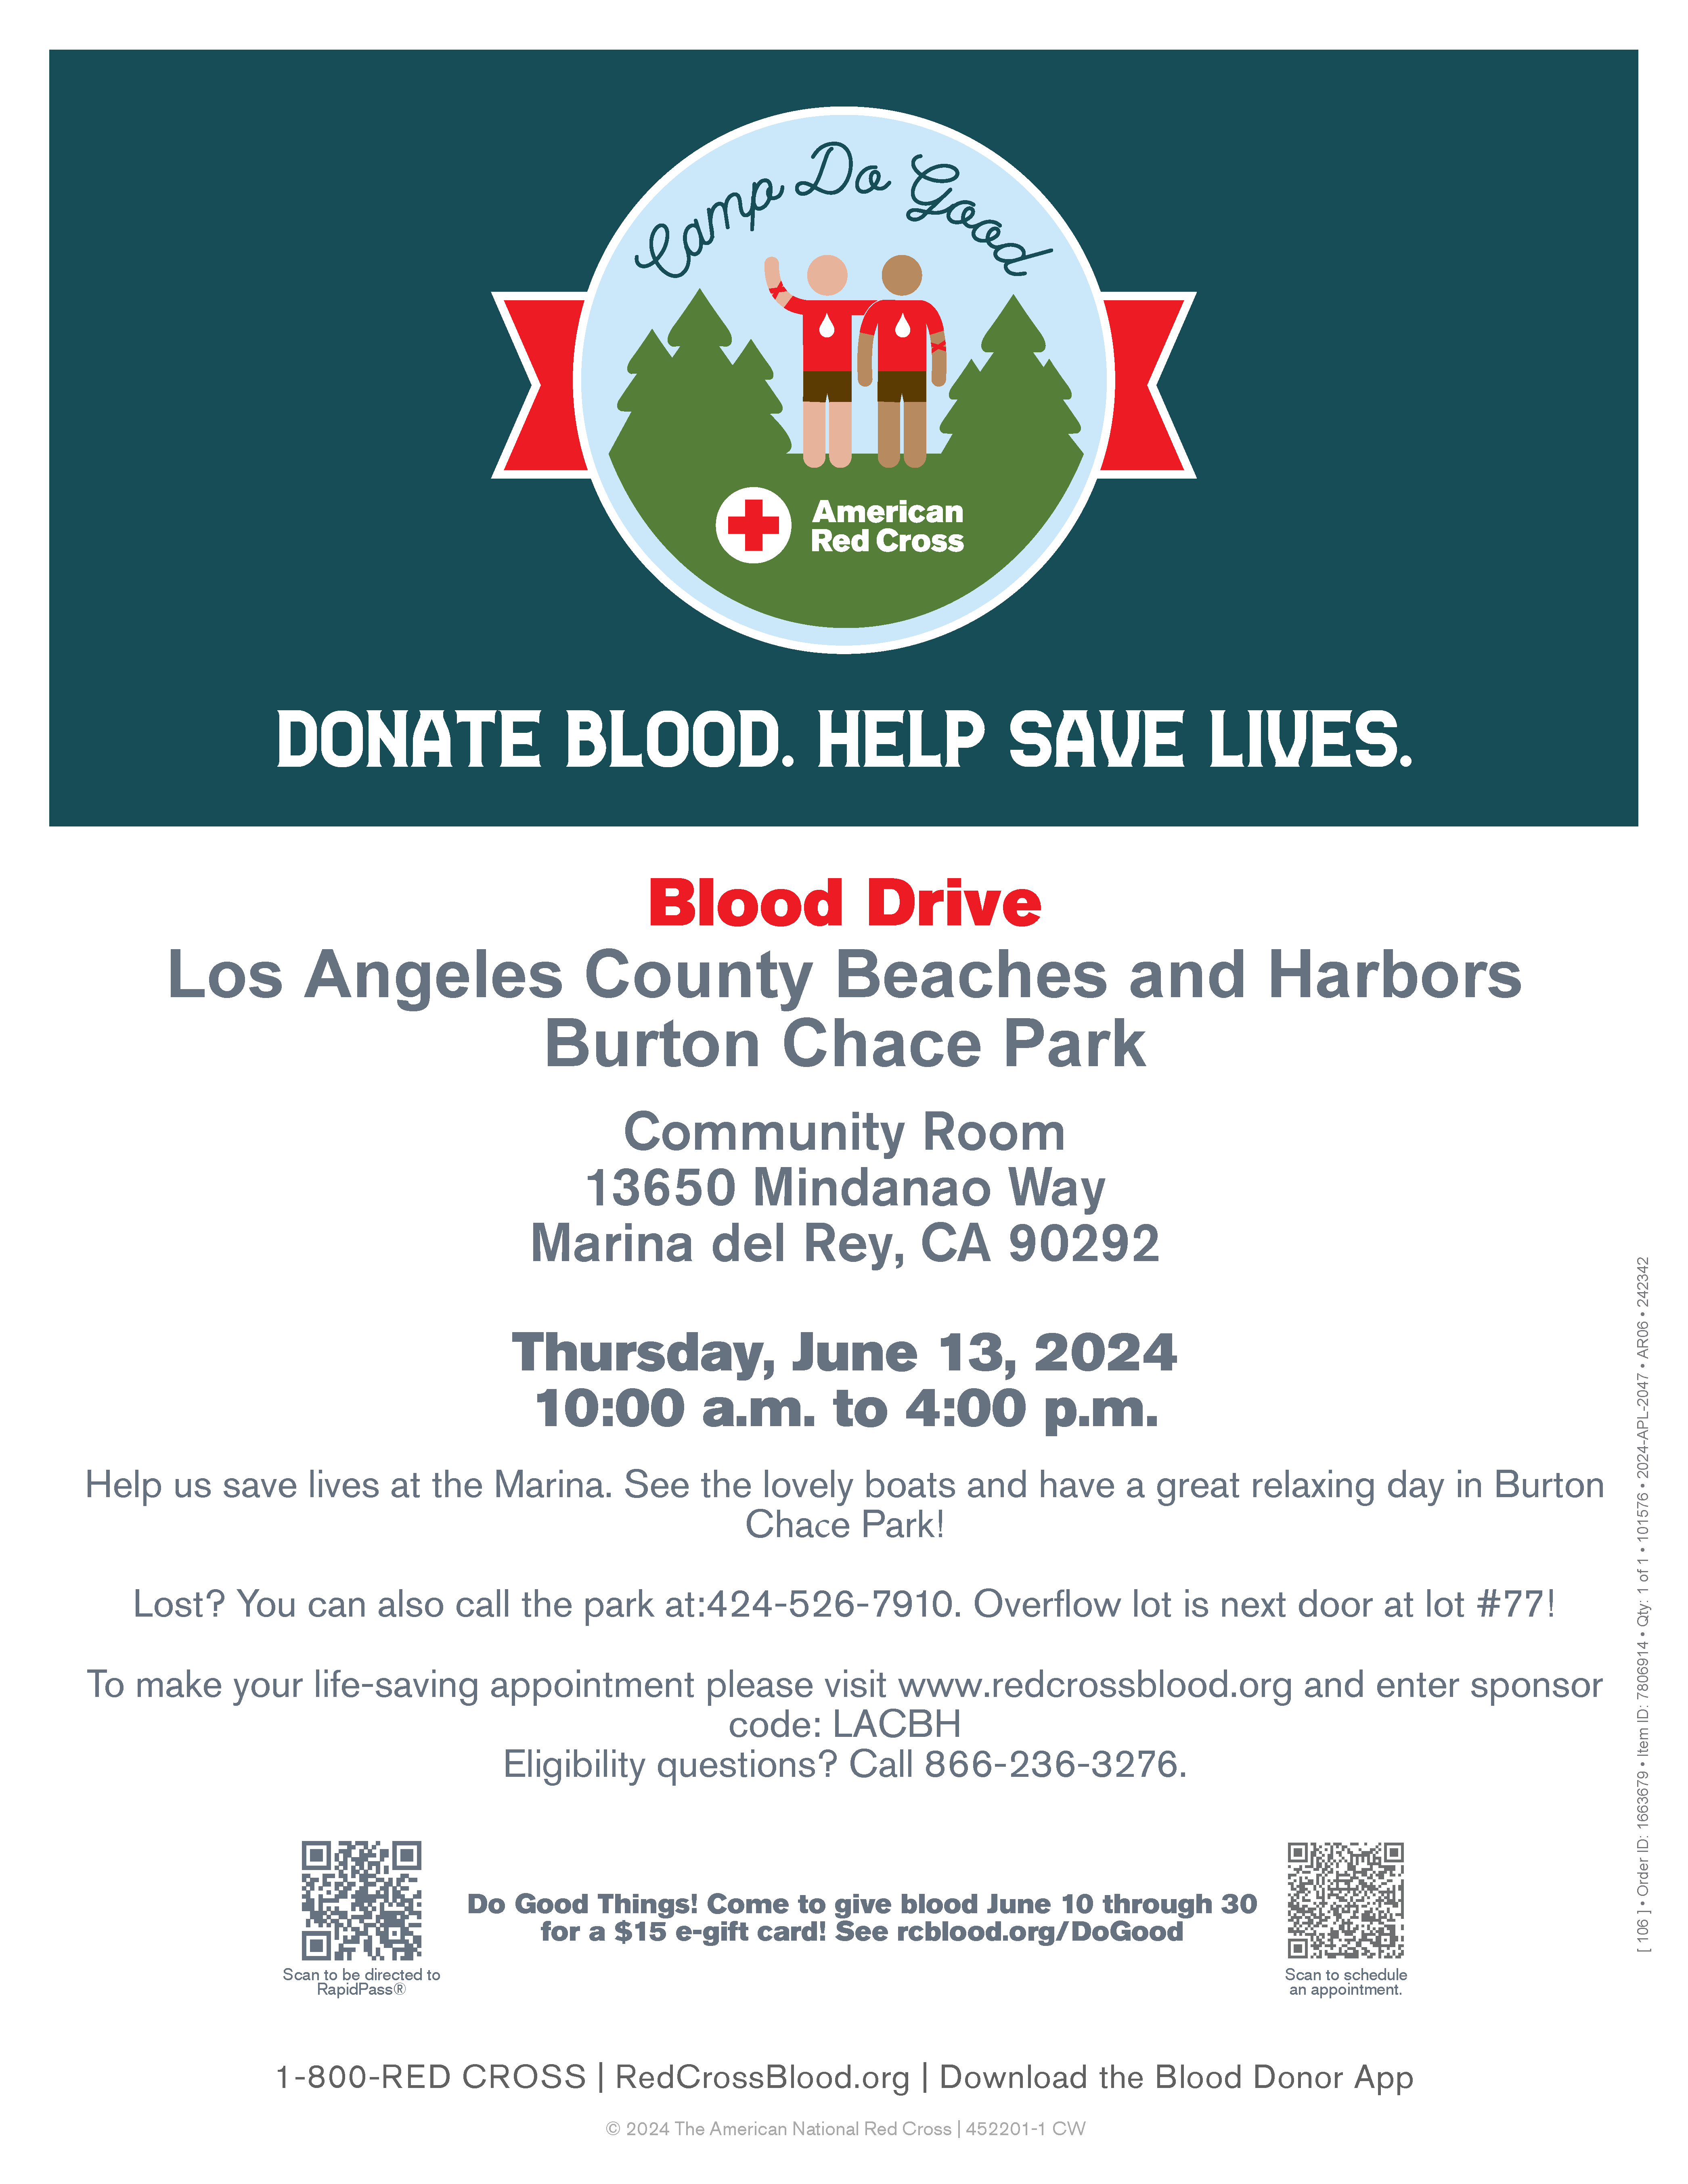 MDR Blood Drive on June 13, 2024, at Burton Chace Park